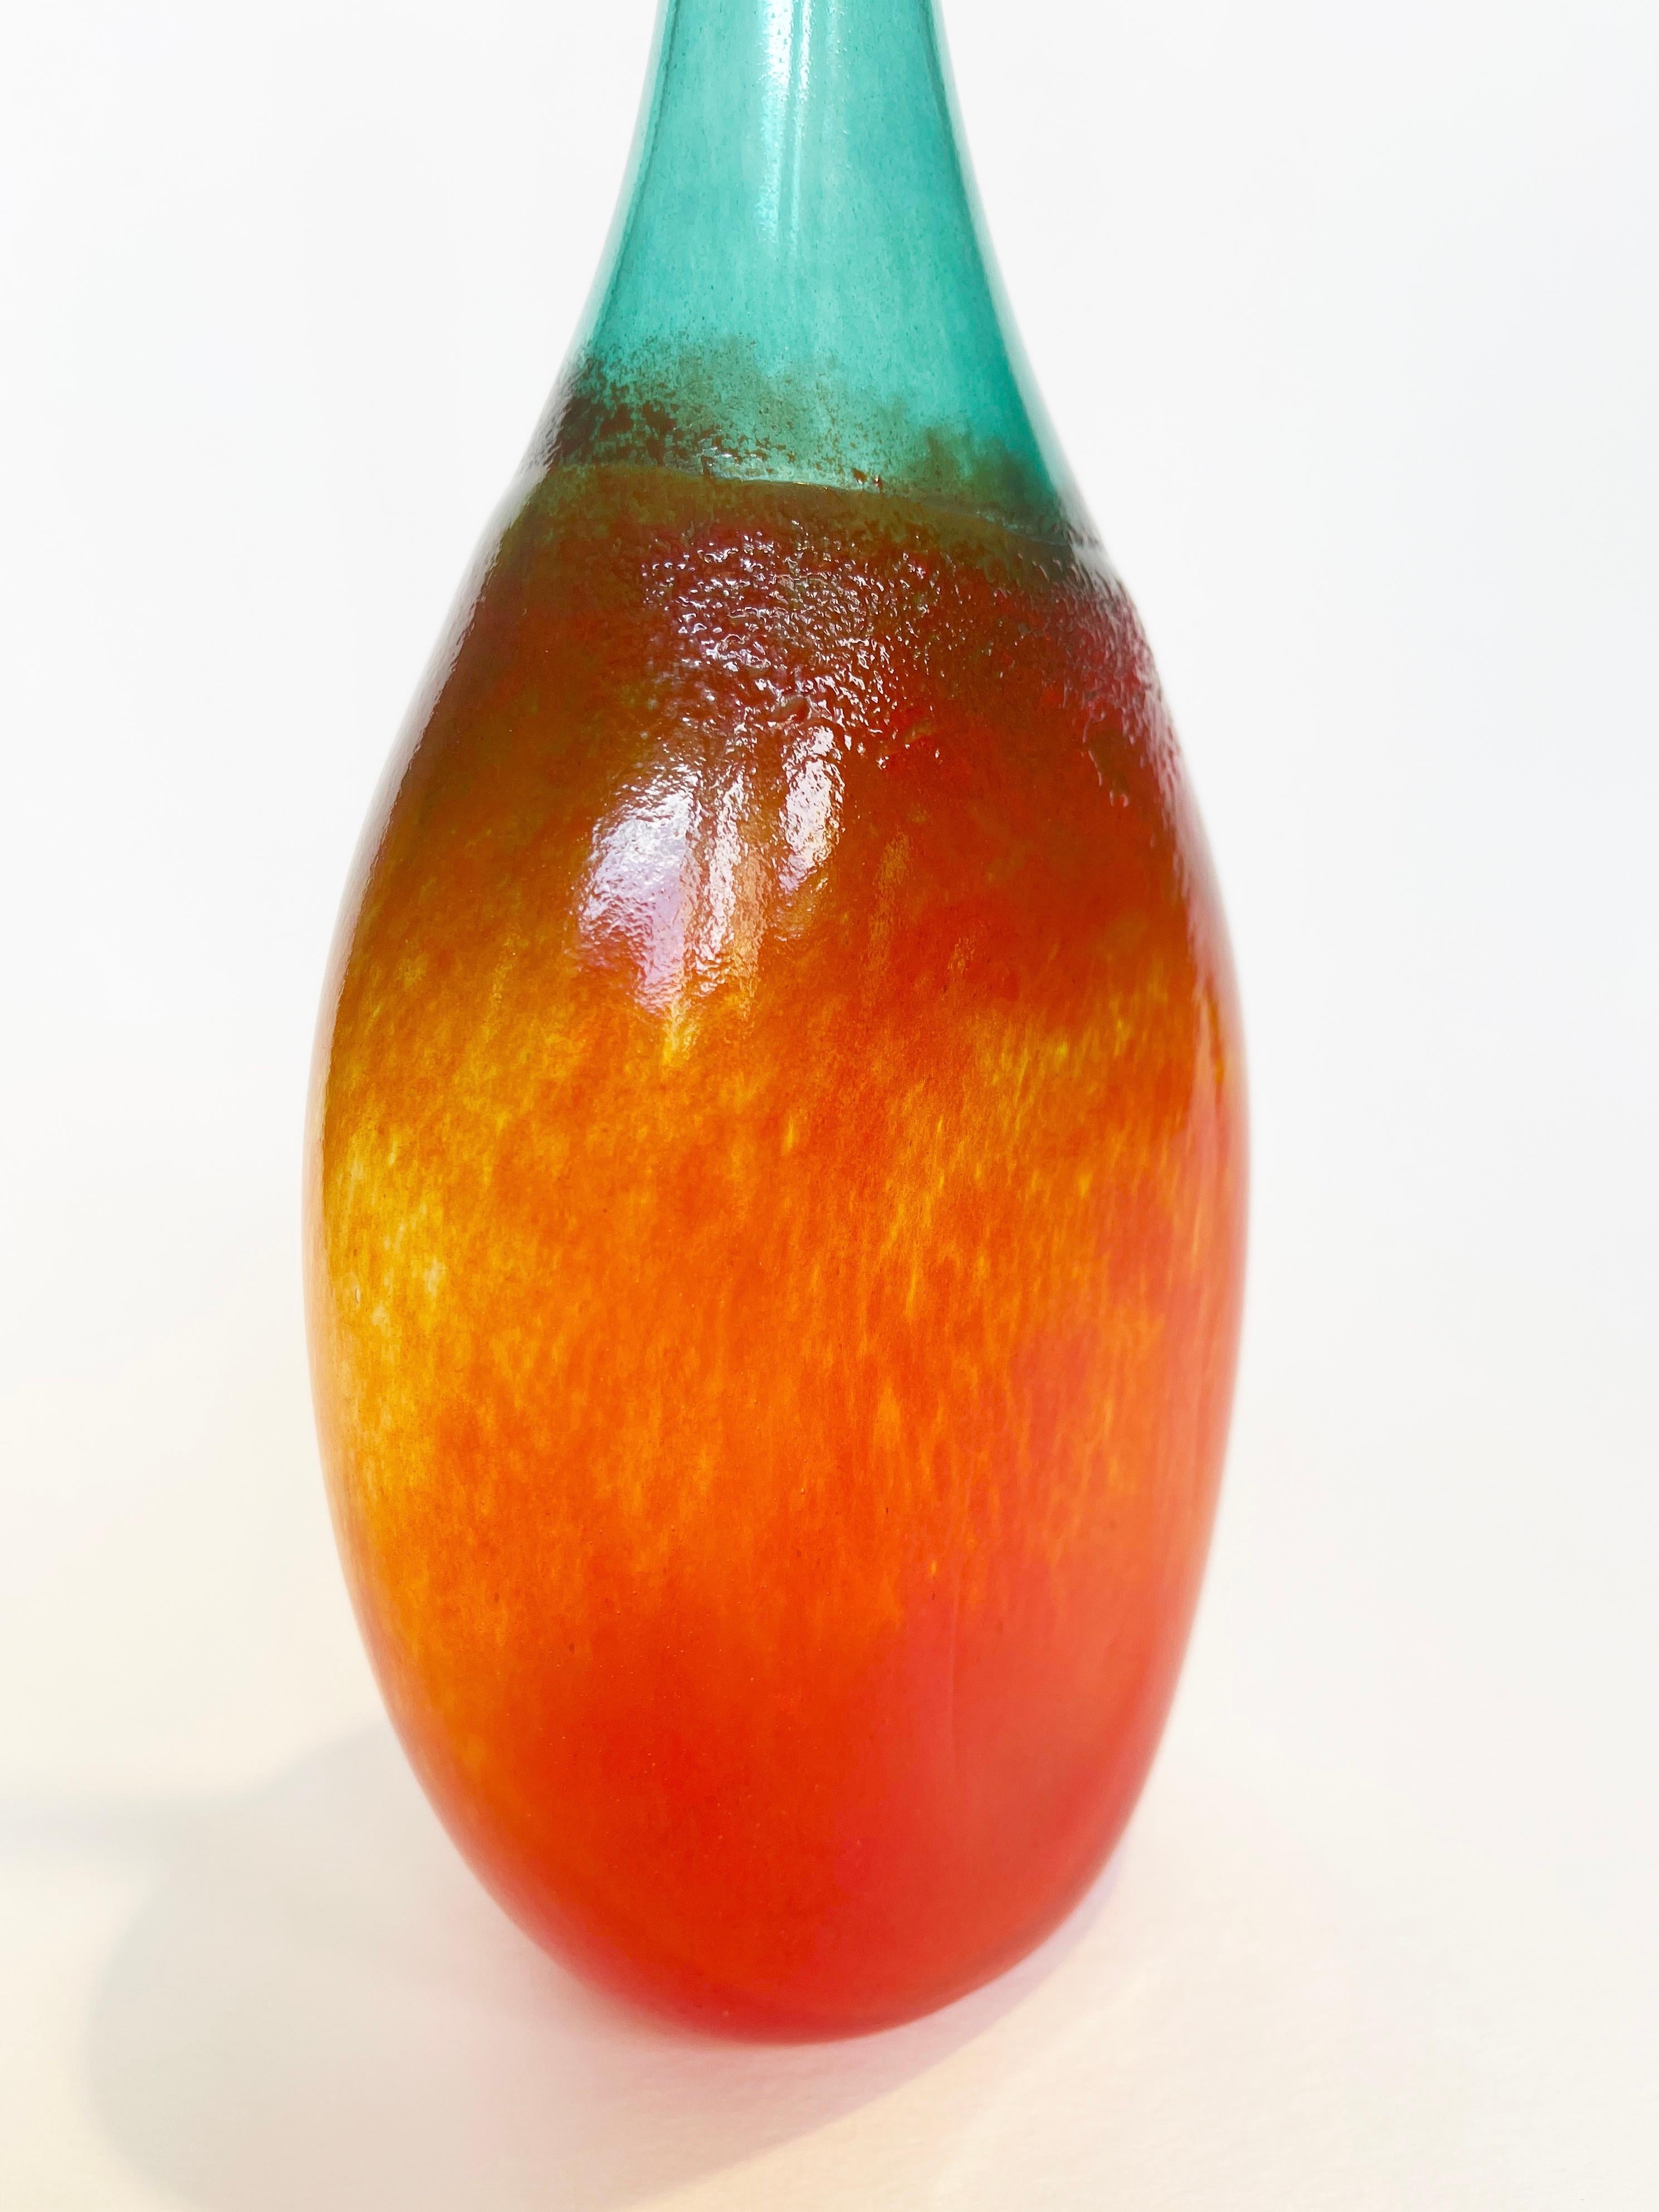 1980s Glass Vase Murano Vibe Turquoise Orange by or after Bertil Vallien, Sweden For Sale 2